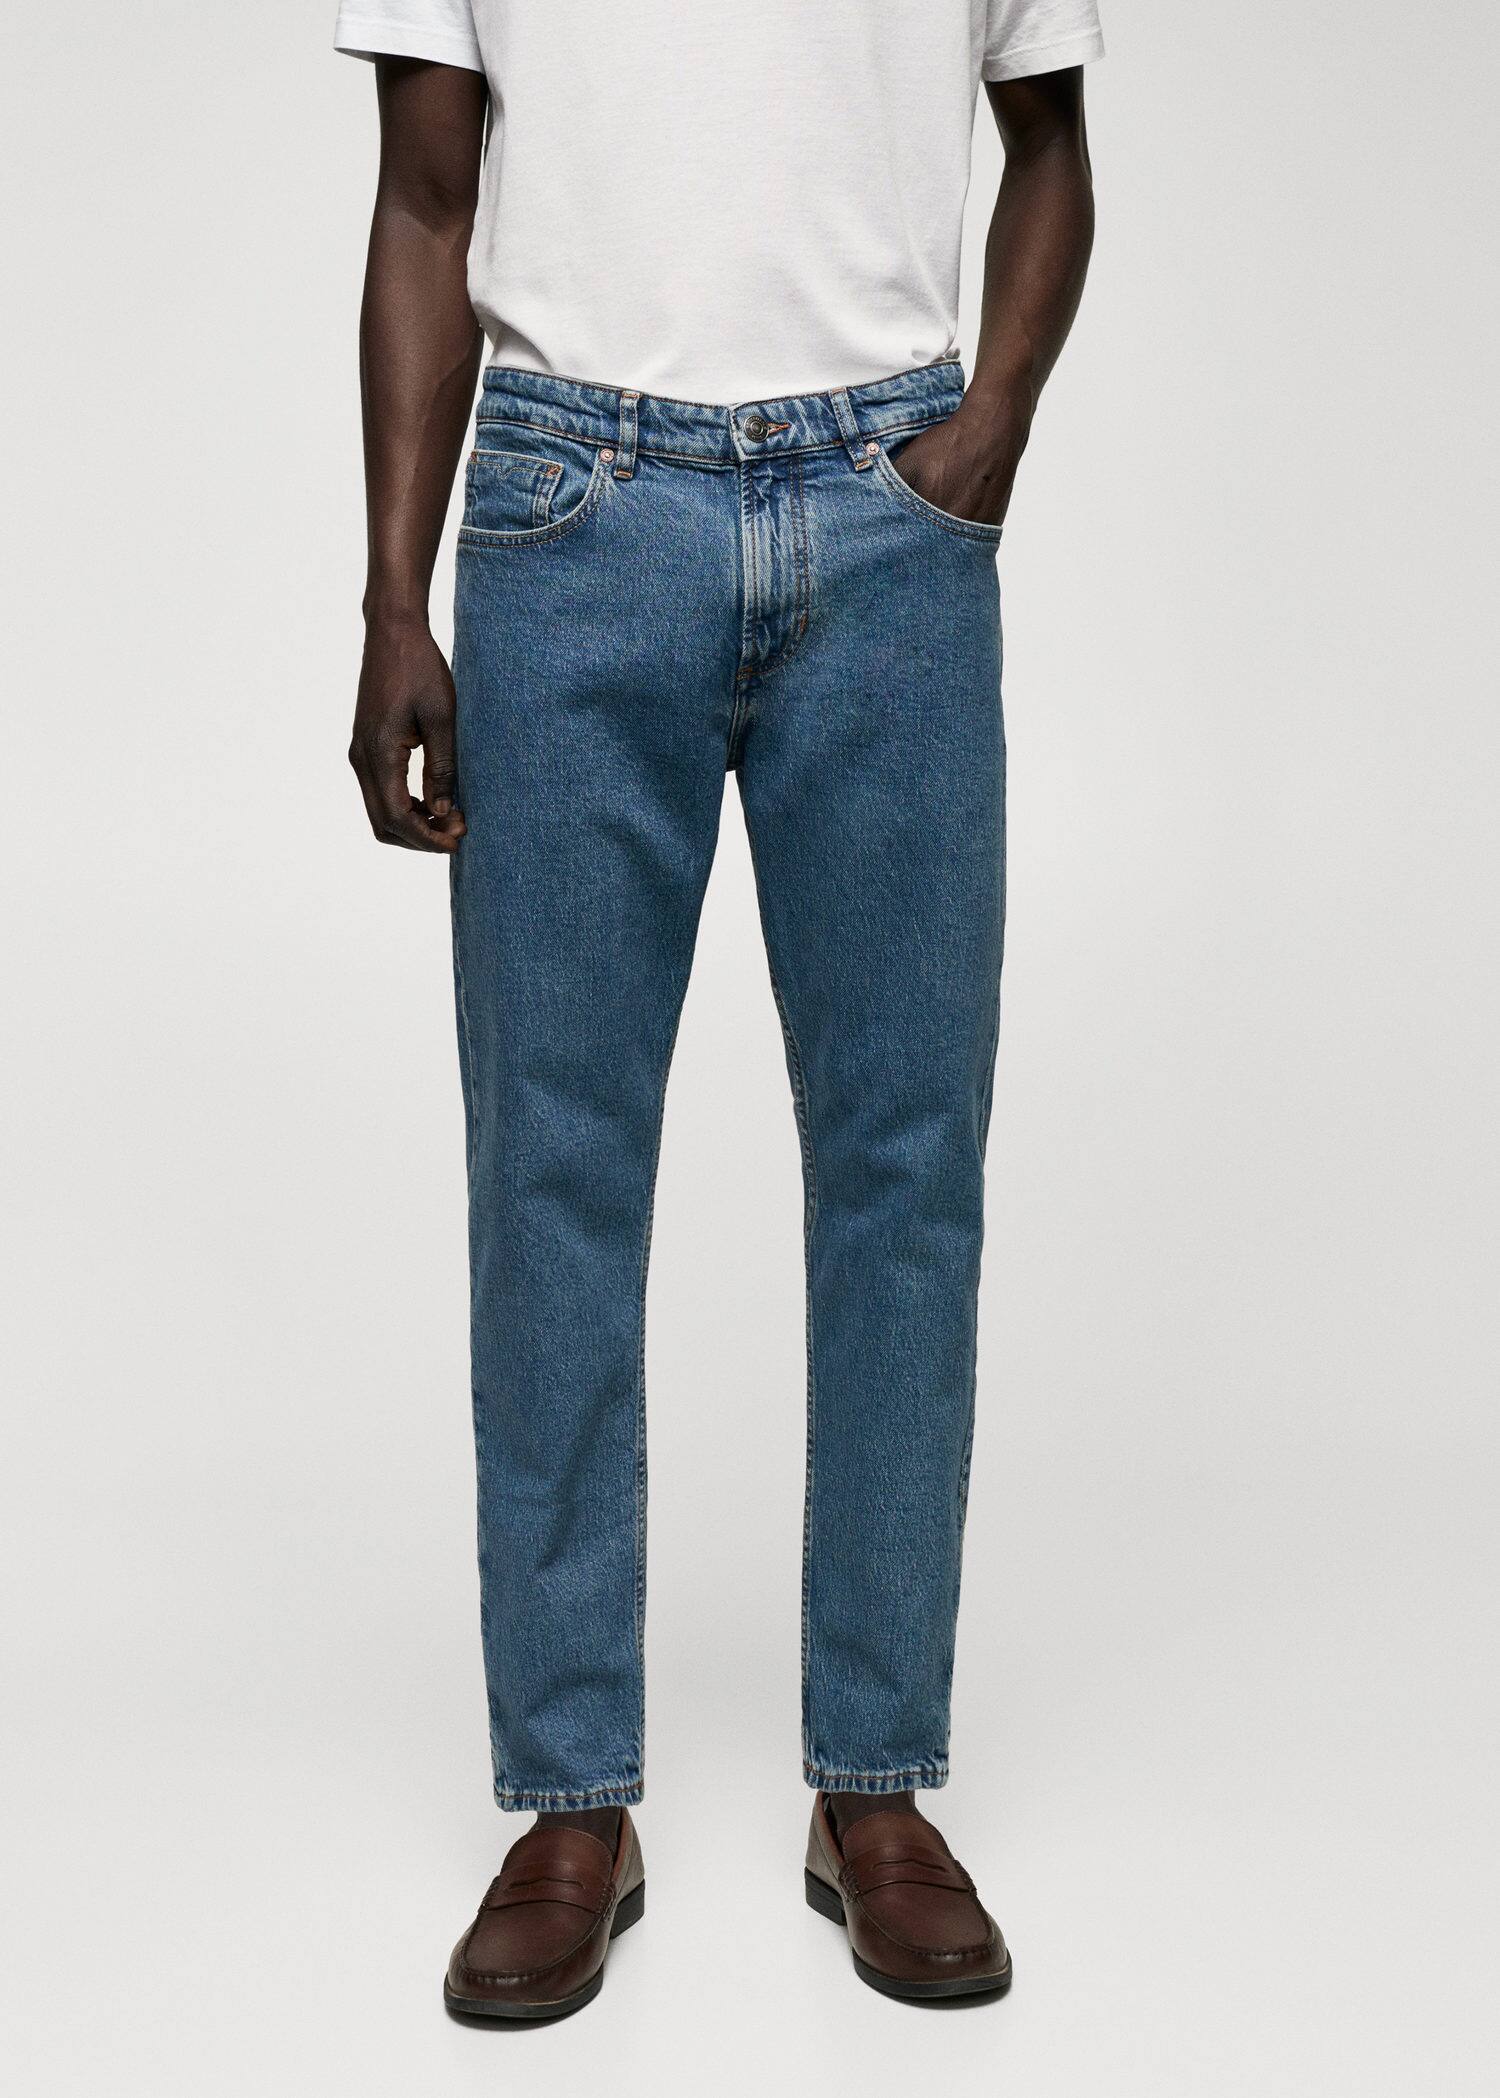 Jeans Ben tapered e cropped - Plano médio